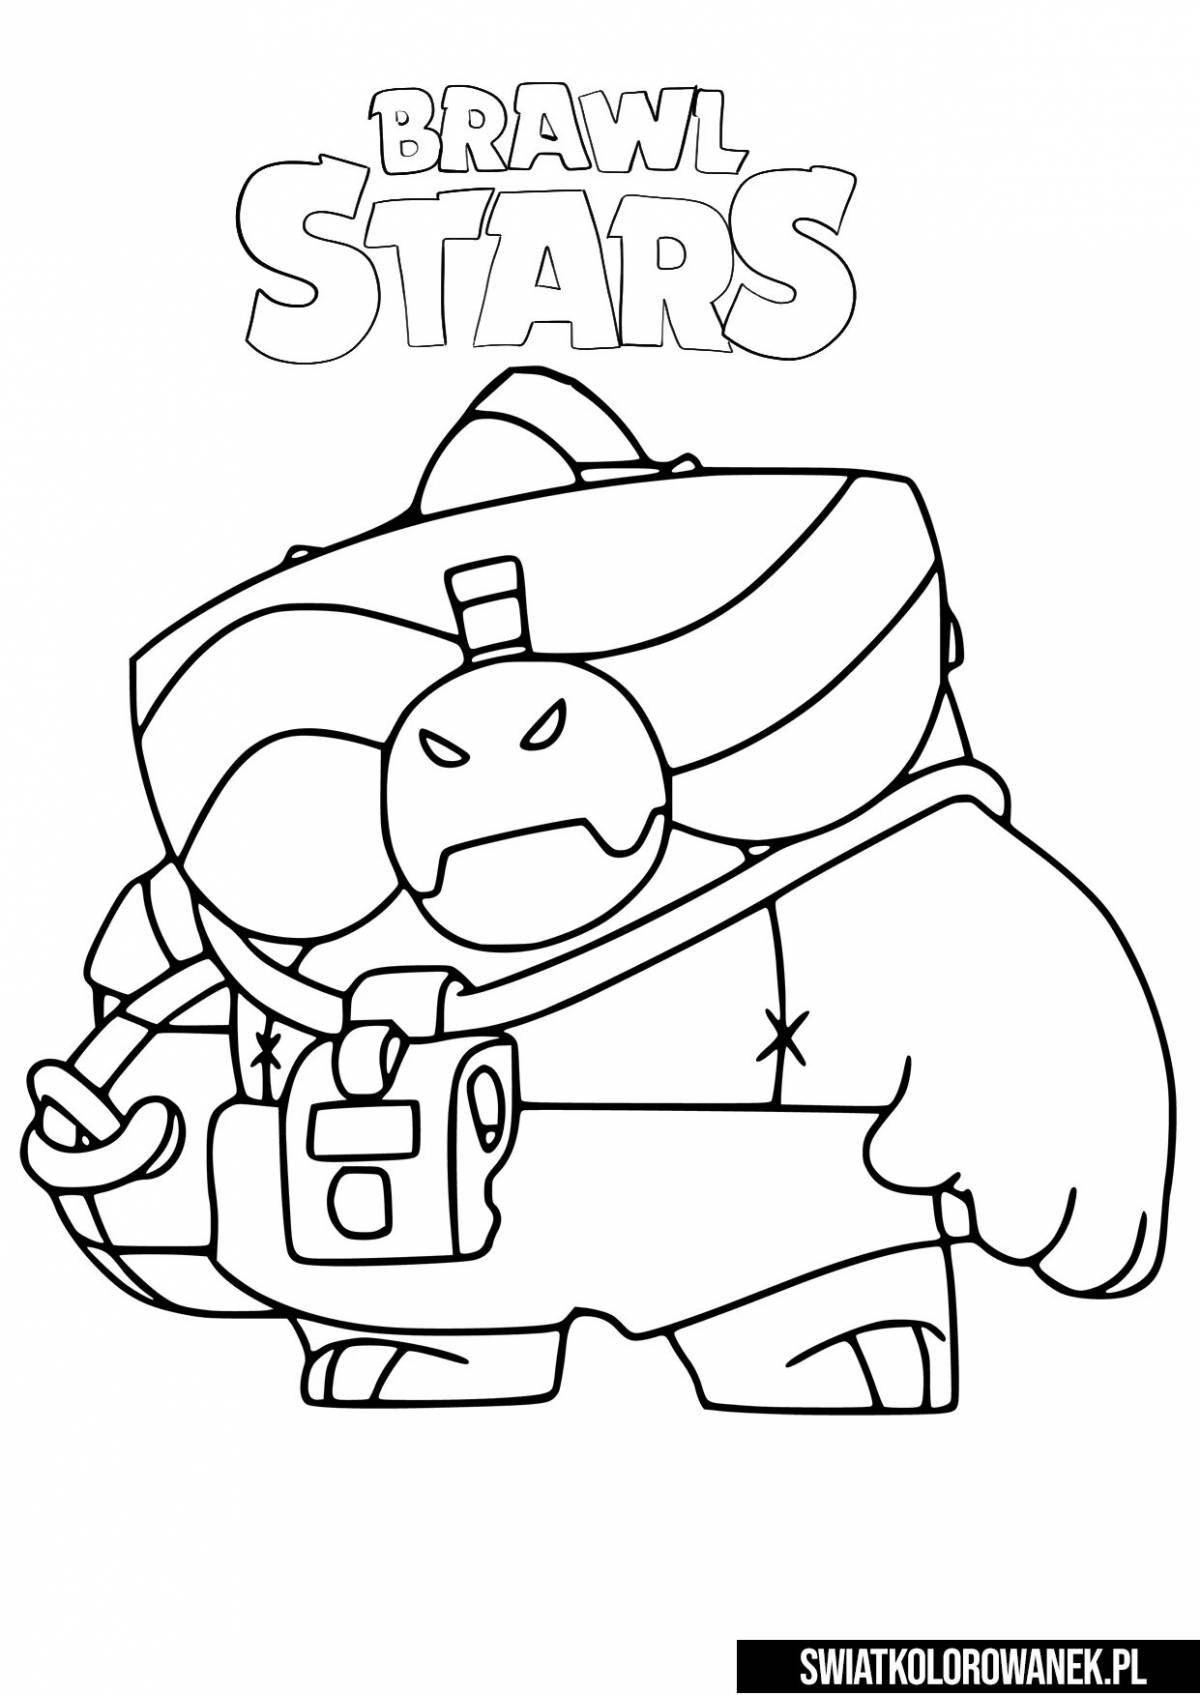 Braver stars weird coloring book for kids